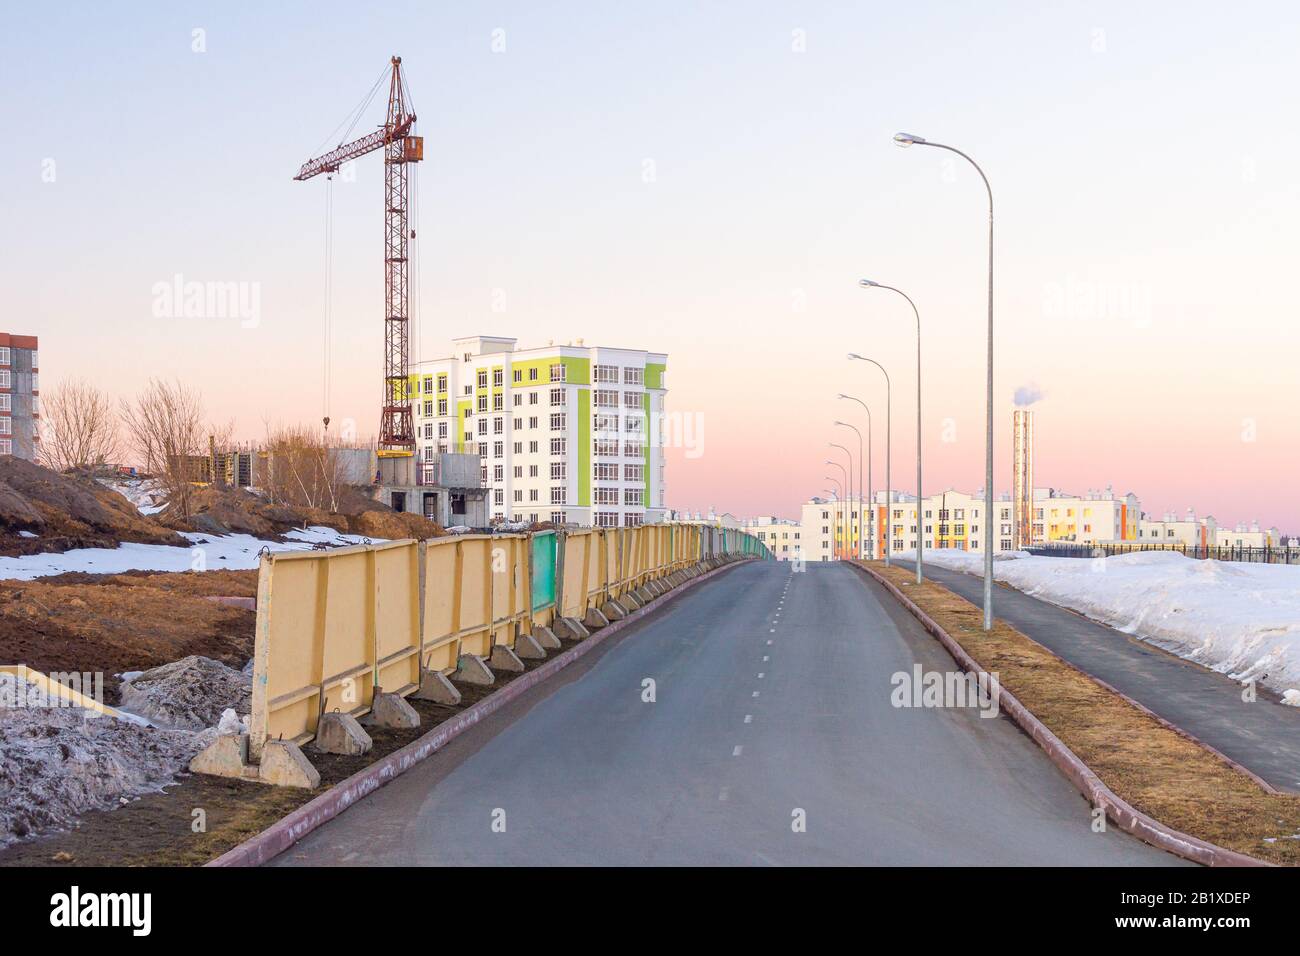 construction of monolithic public and residential buildings using tower cranes building noise in a residential area of low-rise buildings Stock Photo